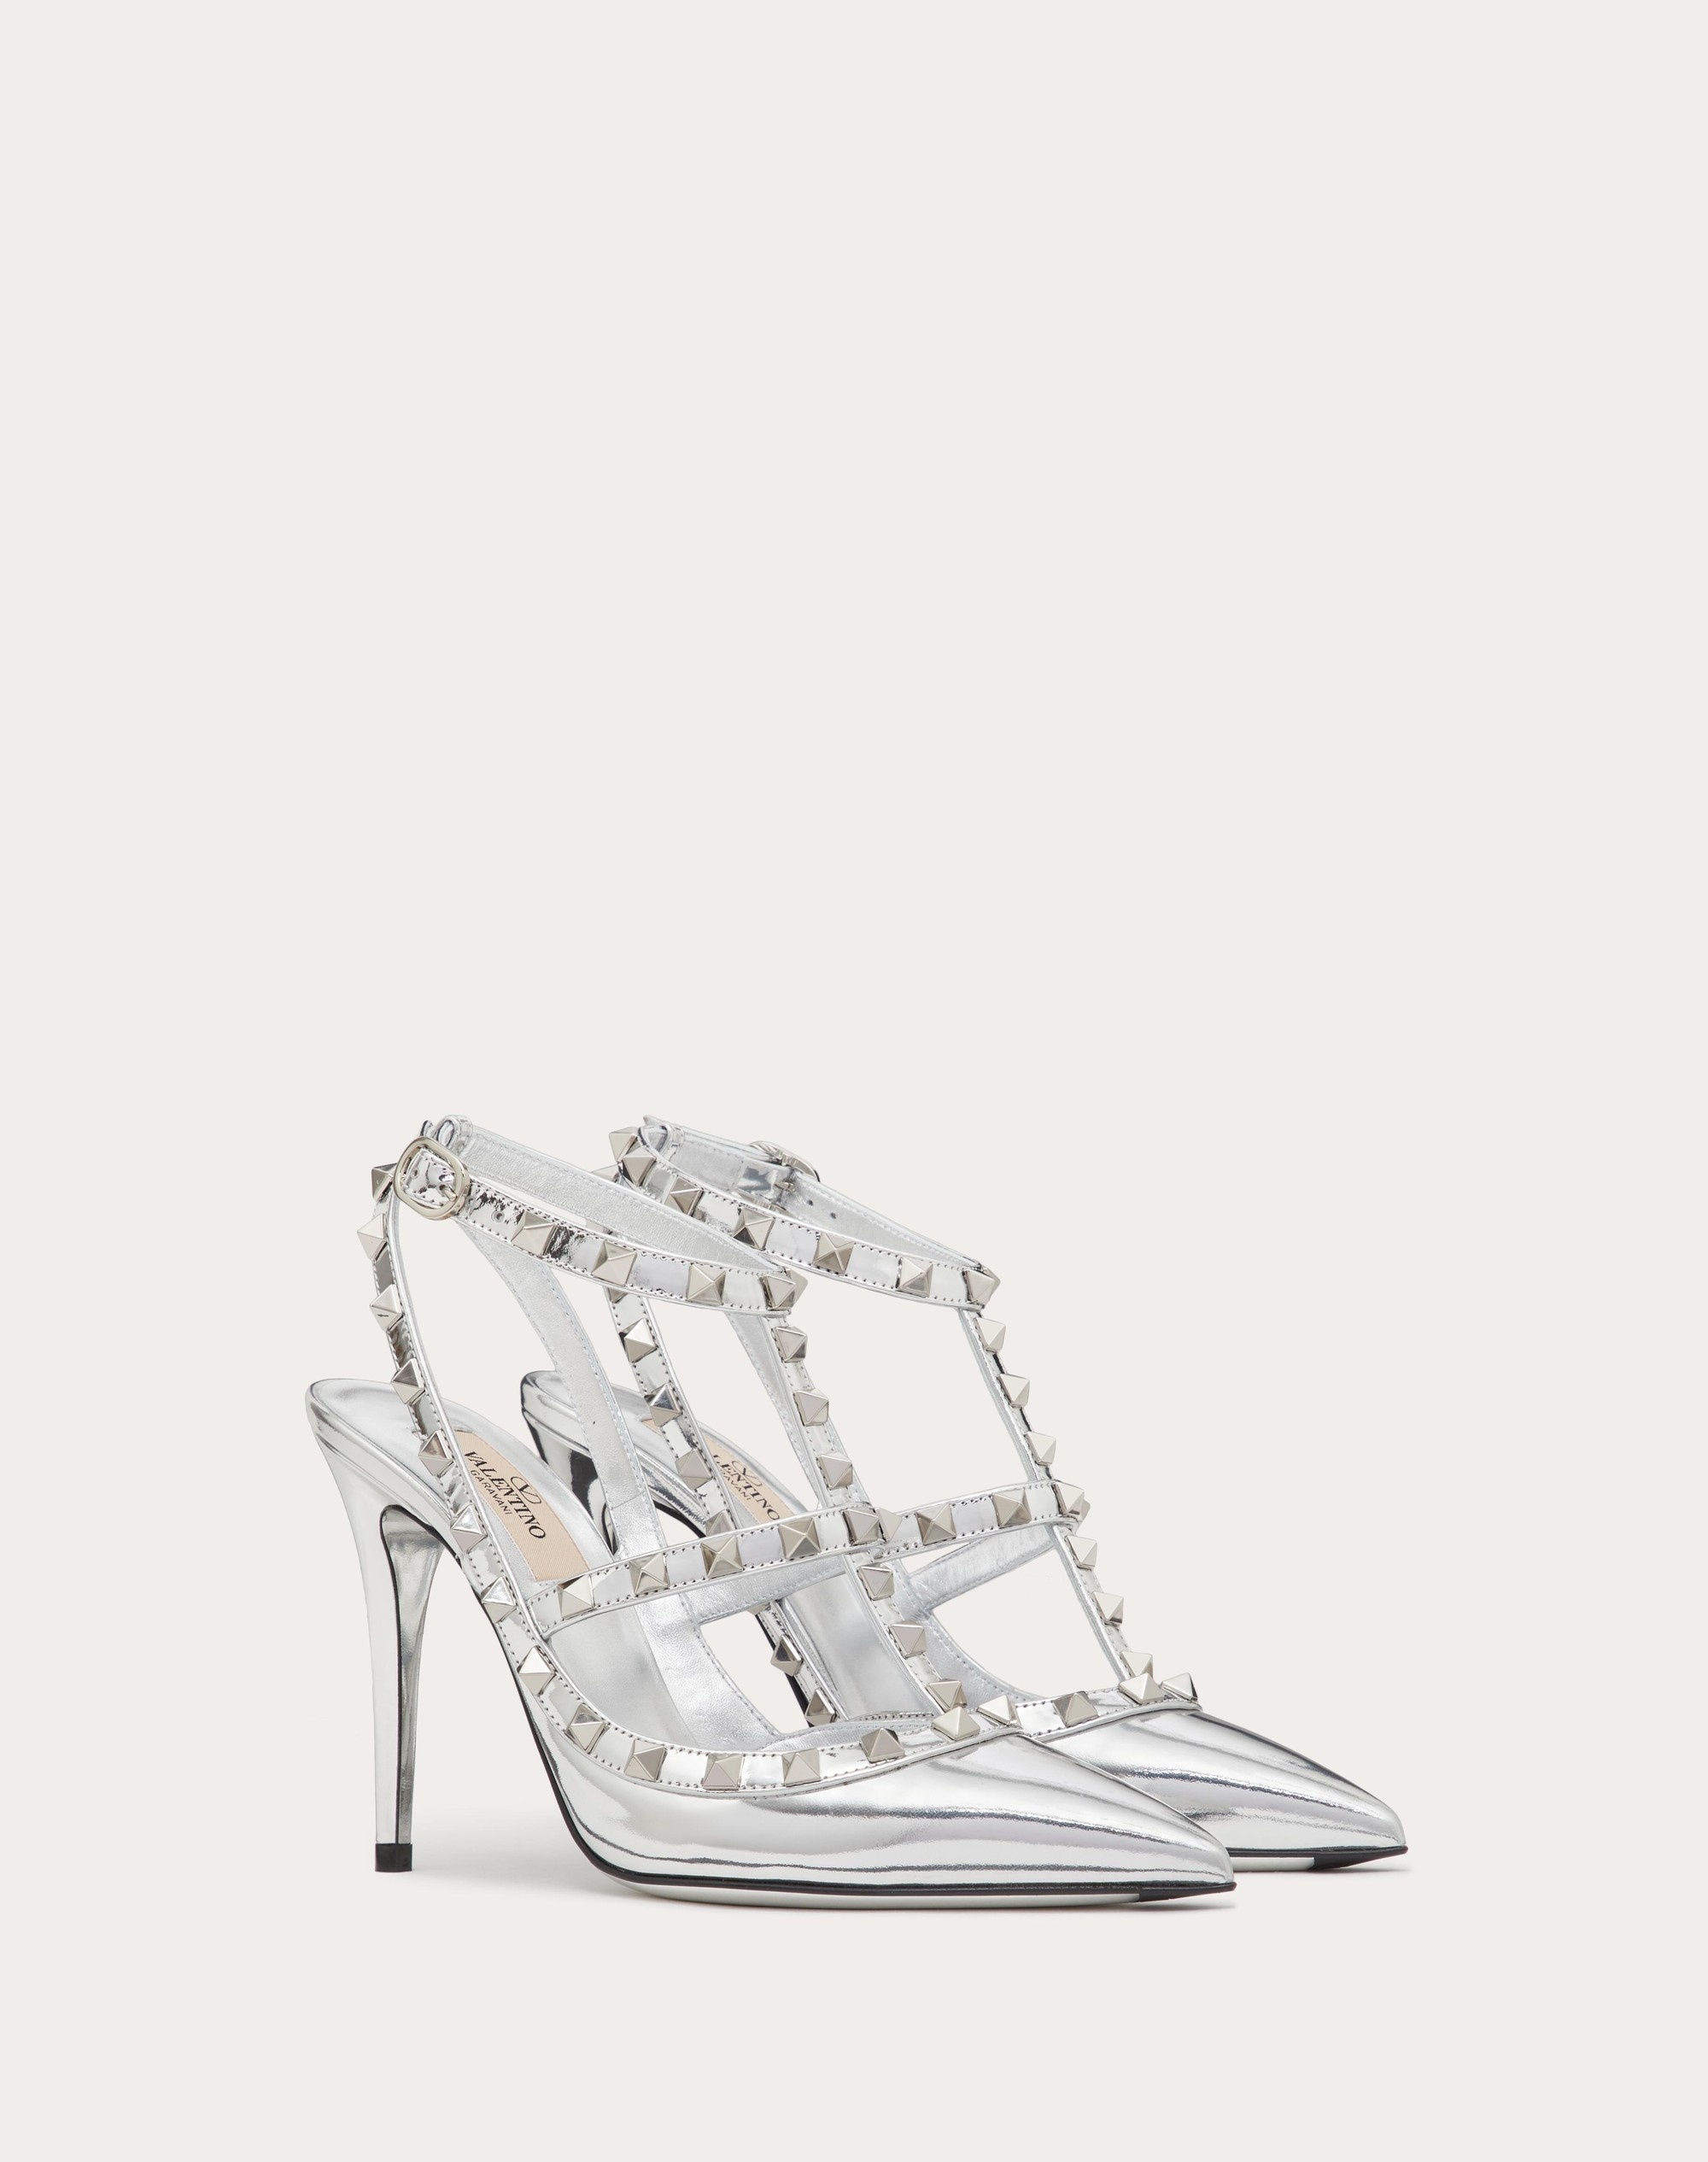 ROCKSTUD MIRROR-EFFECT PUMP WITH MATCHING STRAPS AND STUDS 100MM - 2